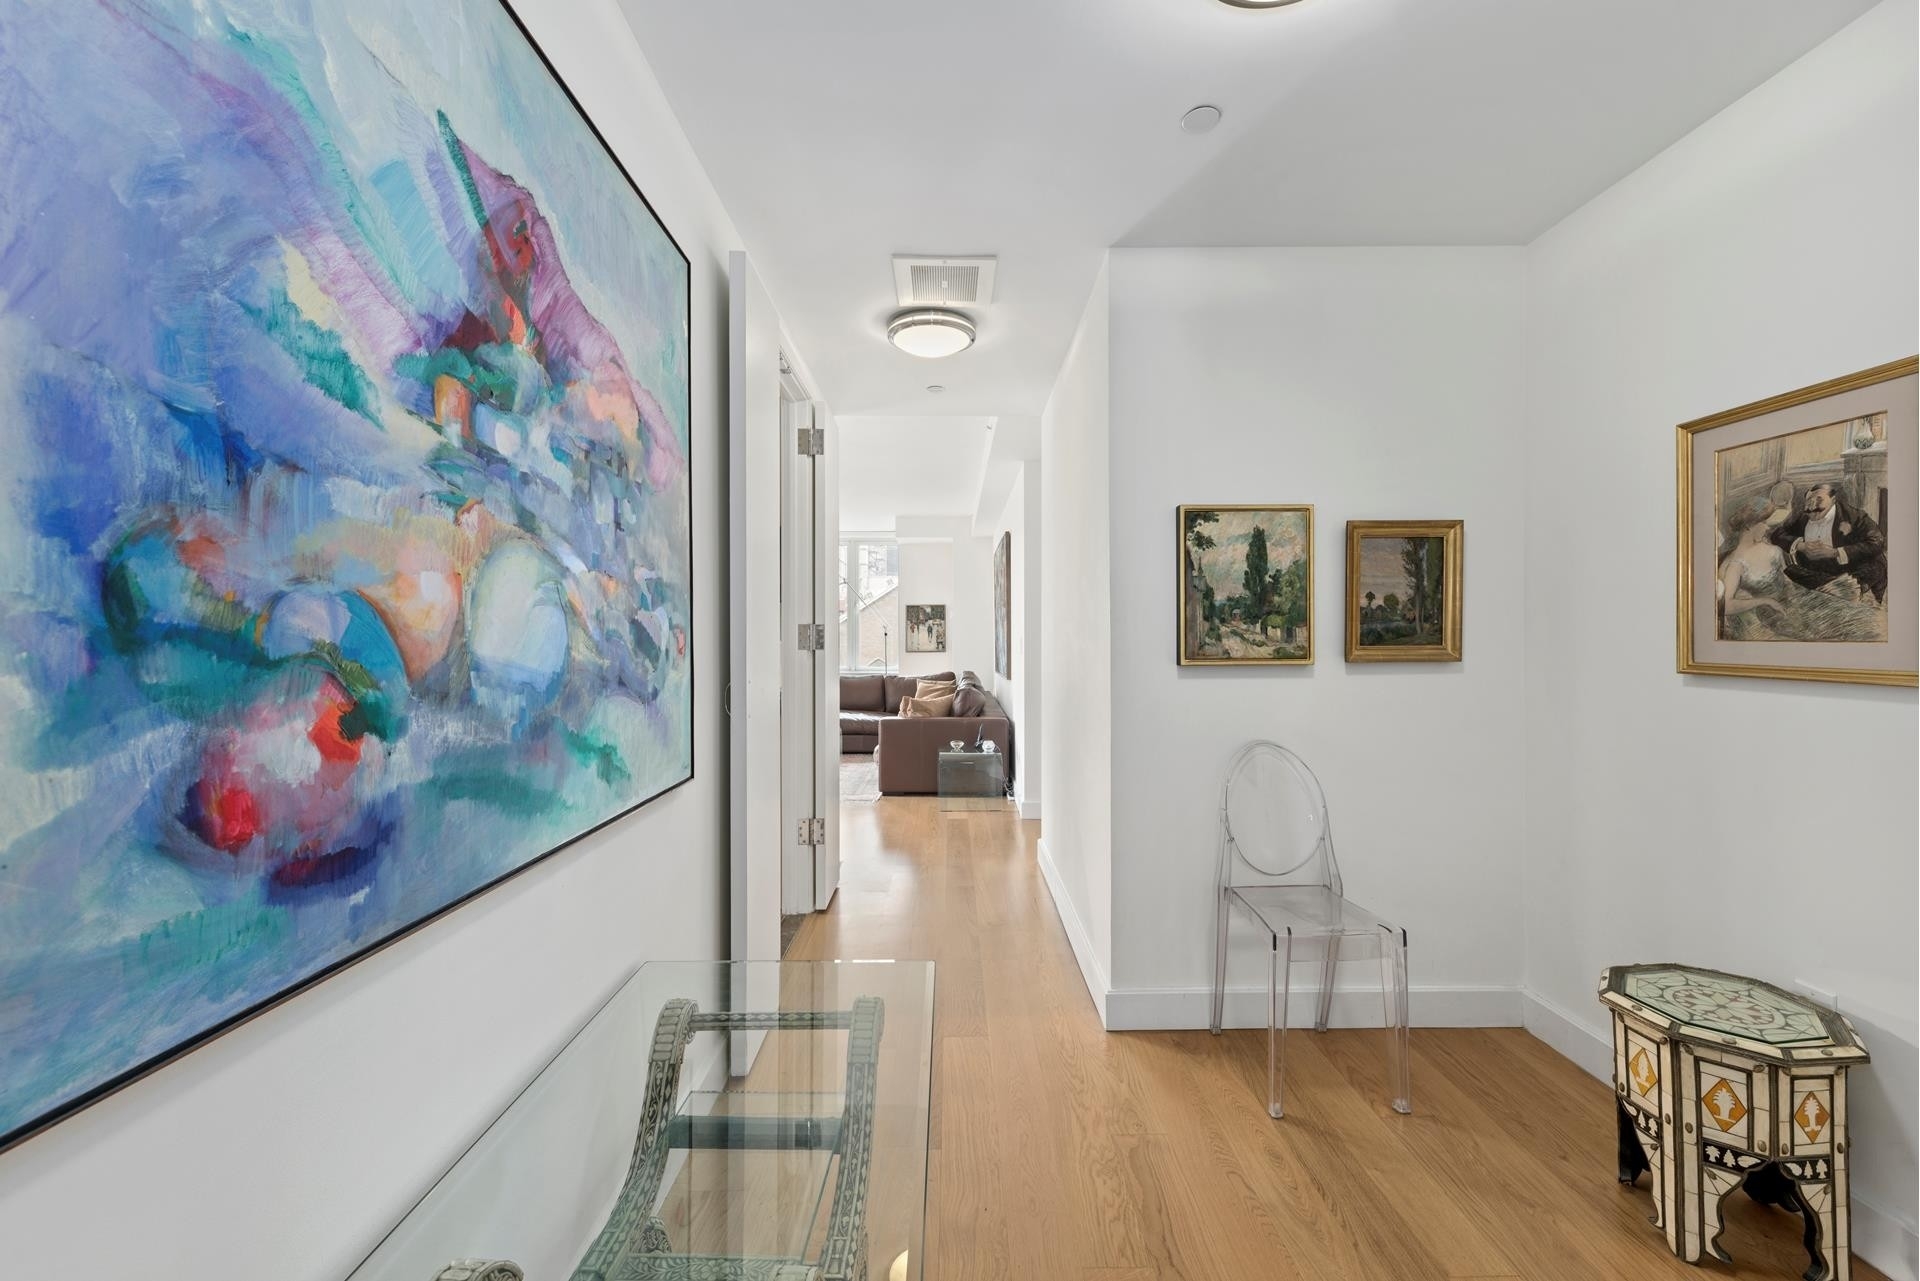 Condominium for Sale at Arcadia, 408 E 79TH ST, 5A Upper East Side, New York, New York 10075